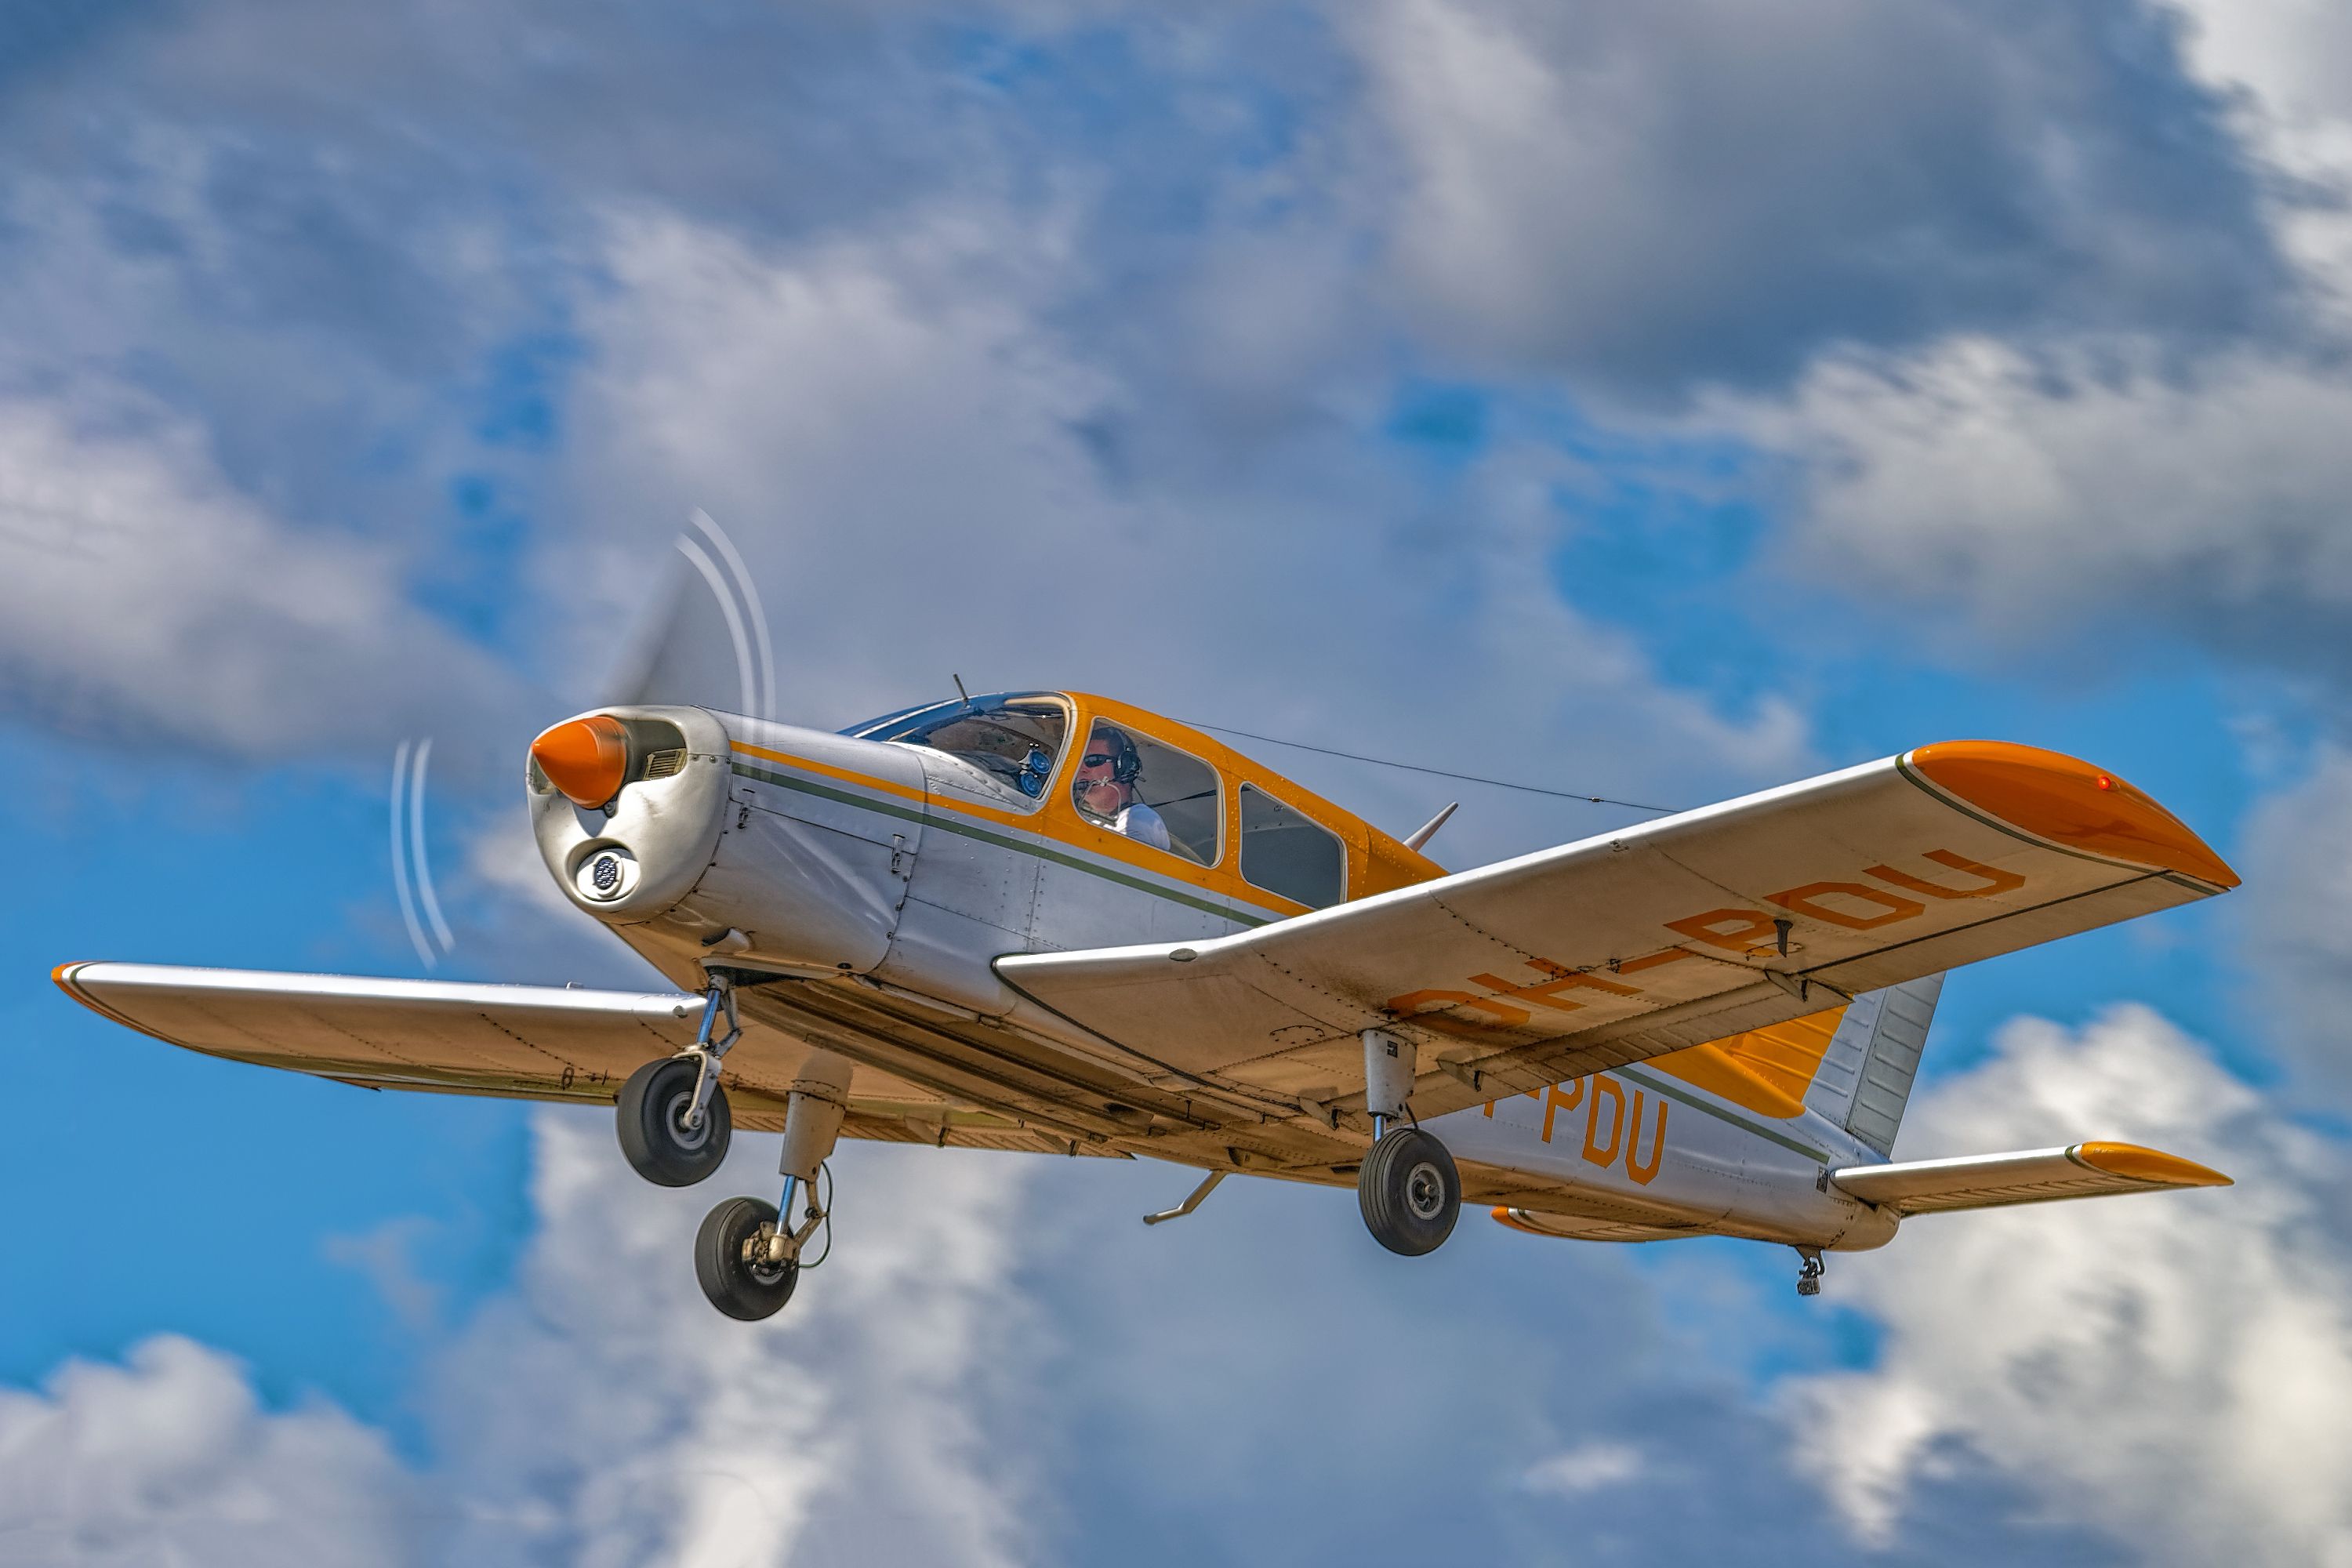 A Piper PA-28 Cherokee flying in the sky.